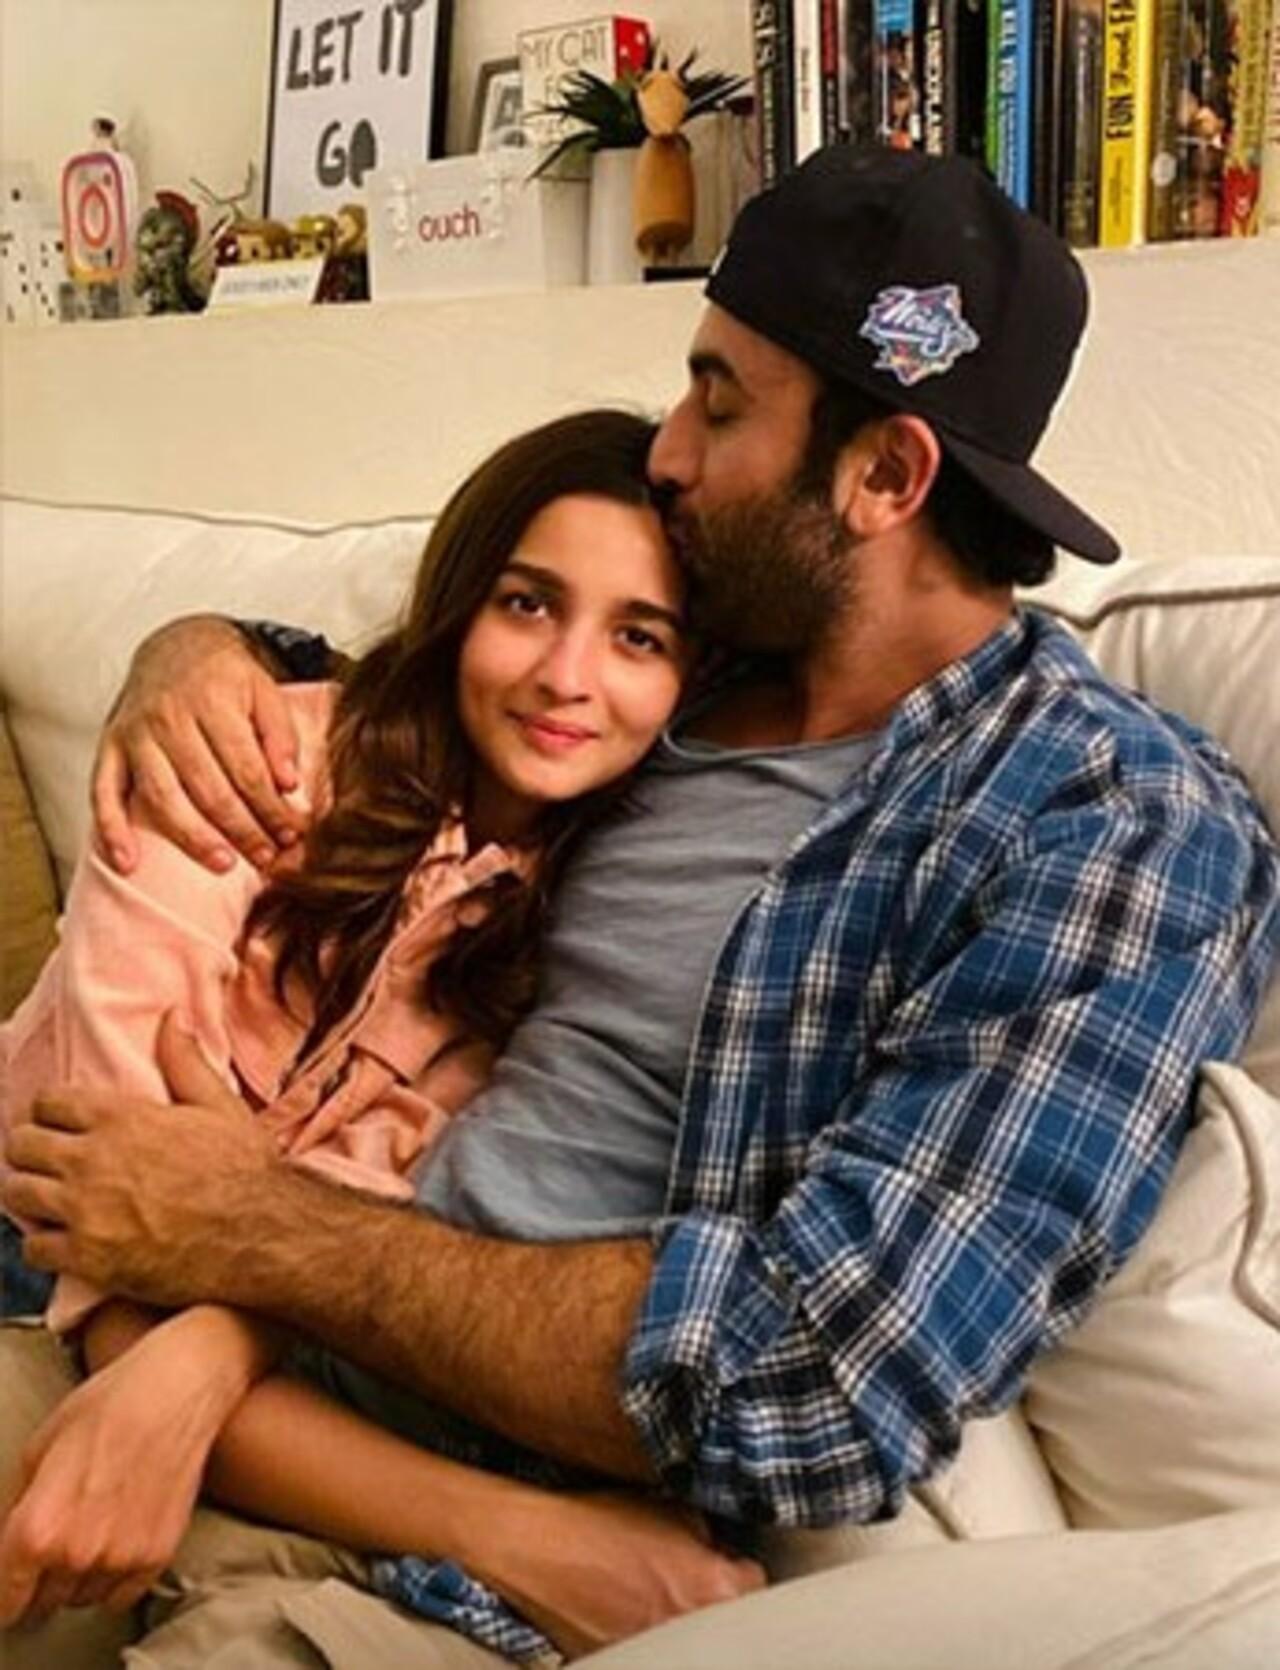 Alia Bhatt-Ranbir Kapoor: Rumours are rife that Alia Bhatt and Ranbir Kapoor will be on the show this season. If true, it will be their first Koffee With Karan together